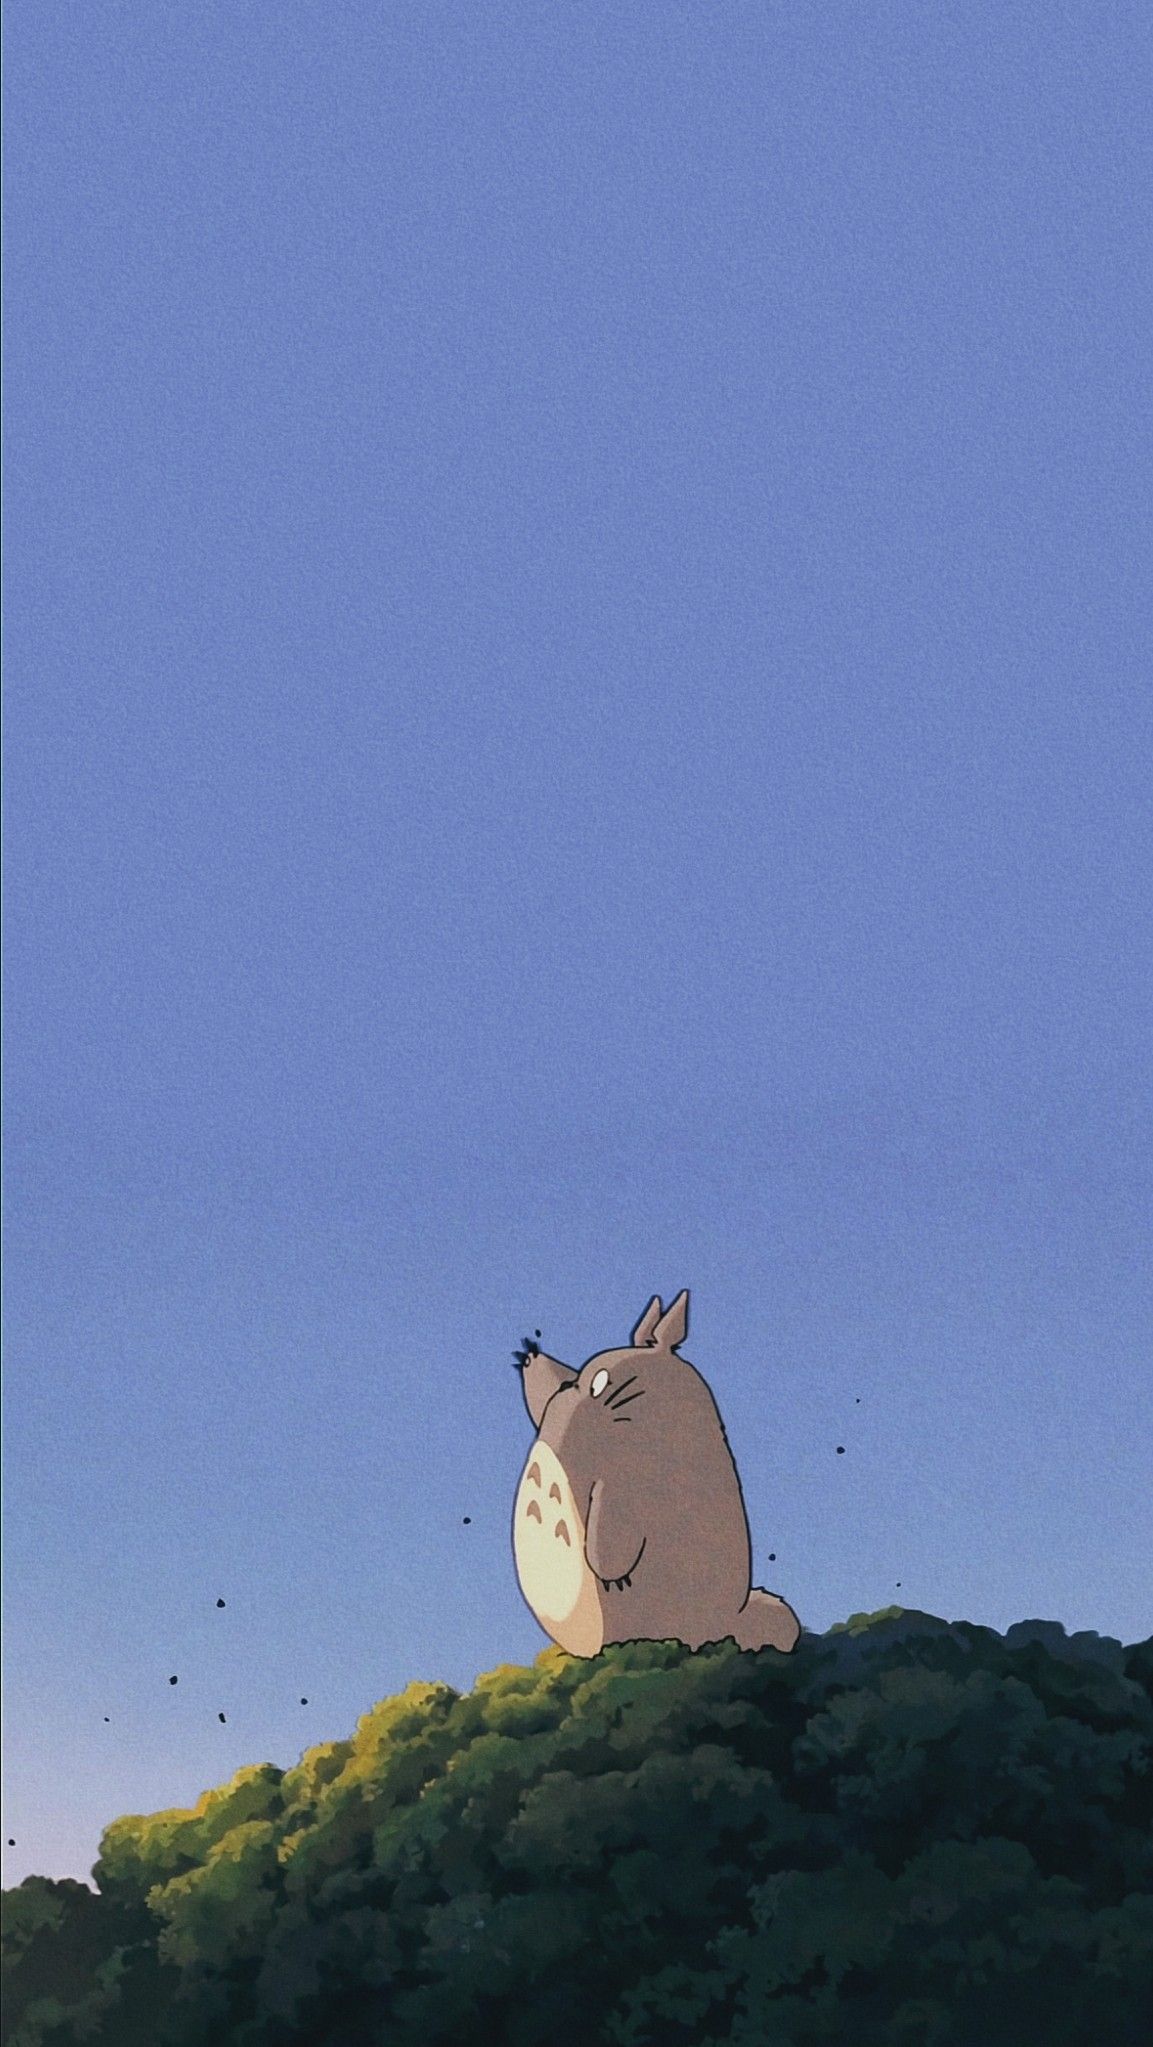 Totoro on a hill looking at the sky - My Neighbor Totoro